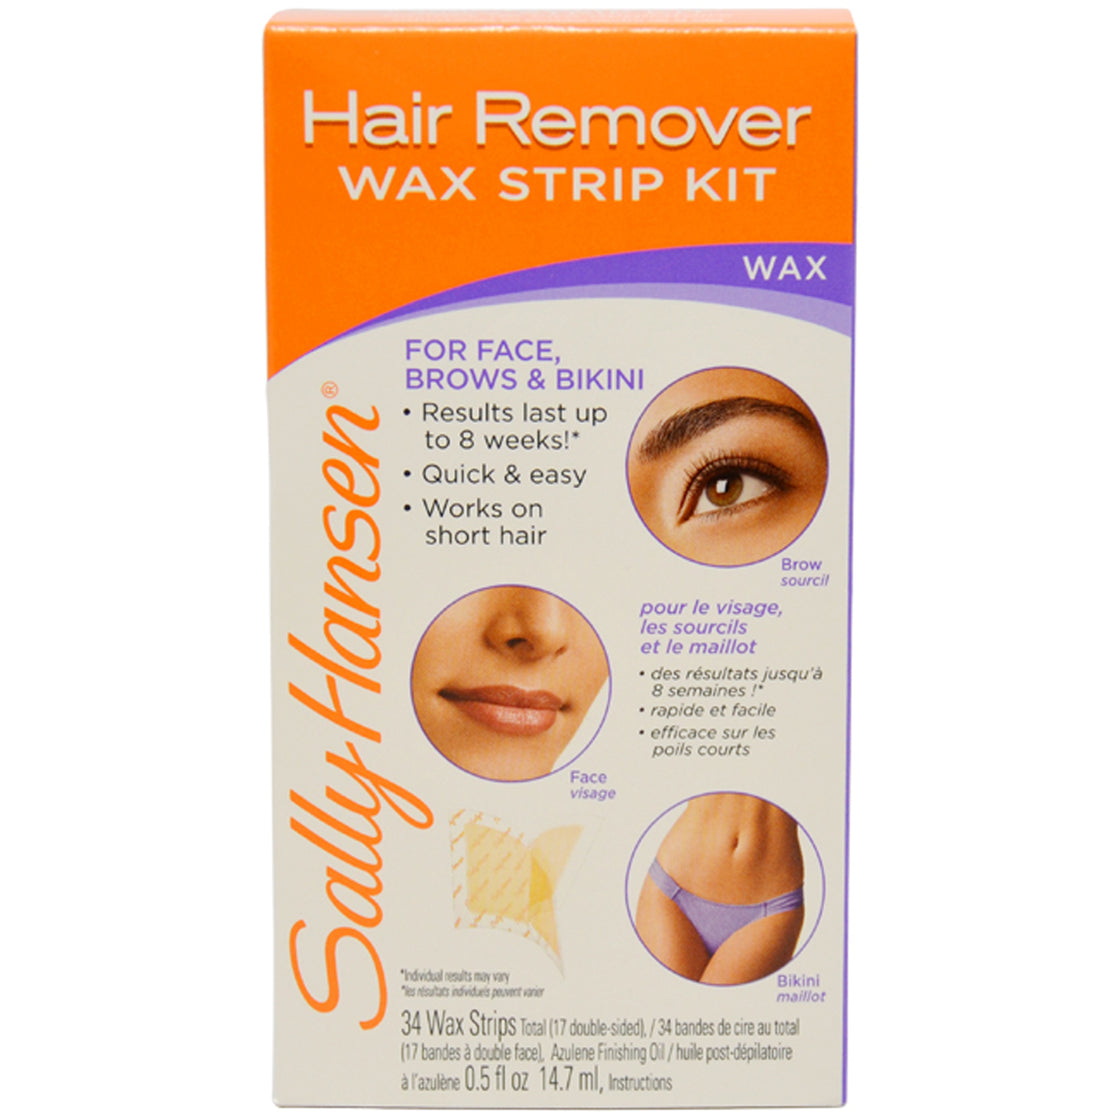 Quick and Easy Hair Remover Wax Strip Kit For Face Eyebrows and Bikini by Sally Hansen for Women - 1 Pack Wax Strip